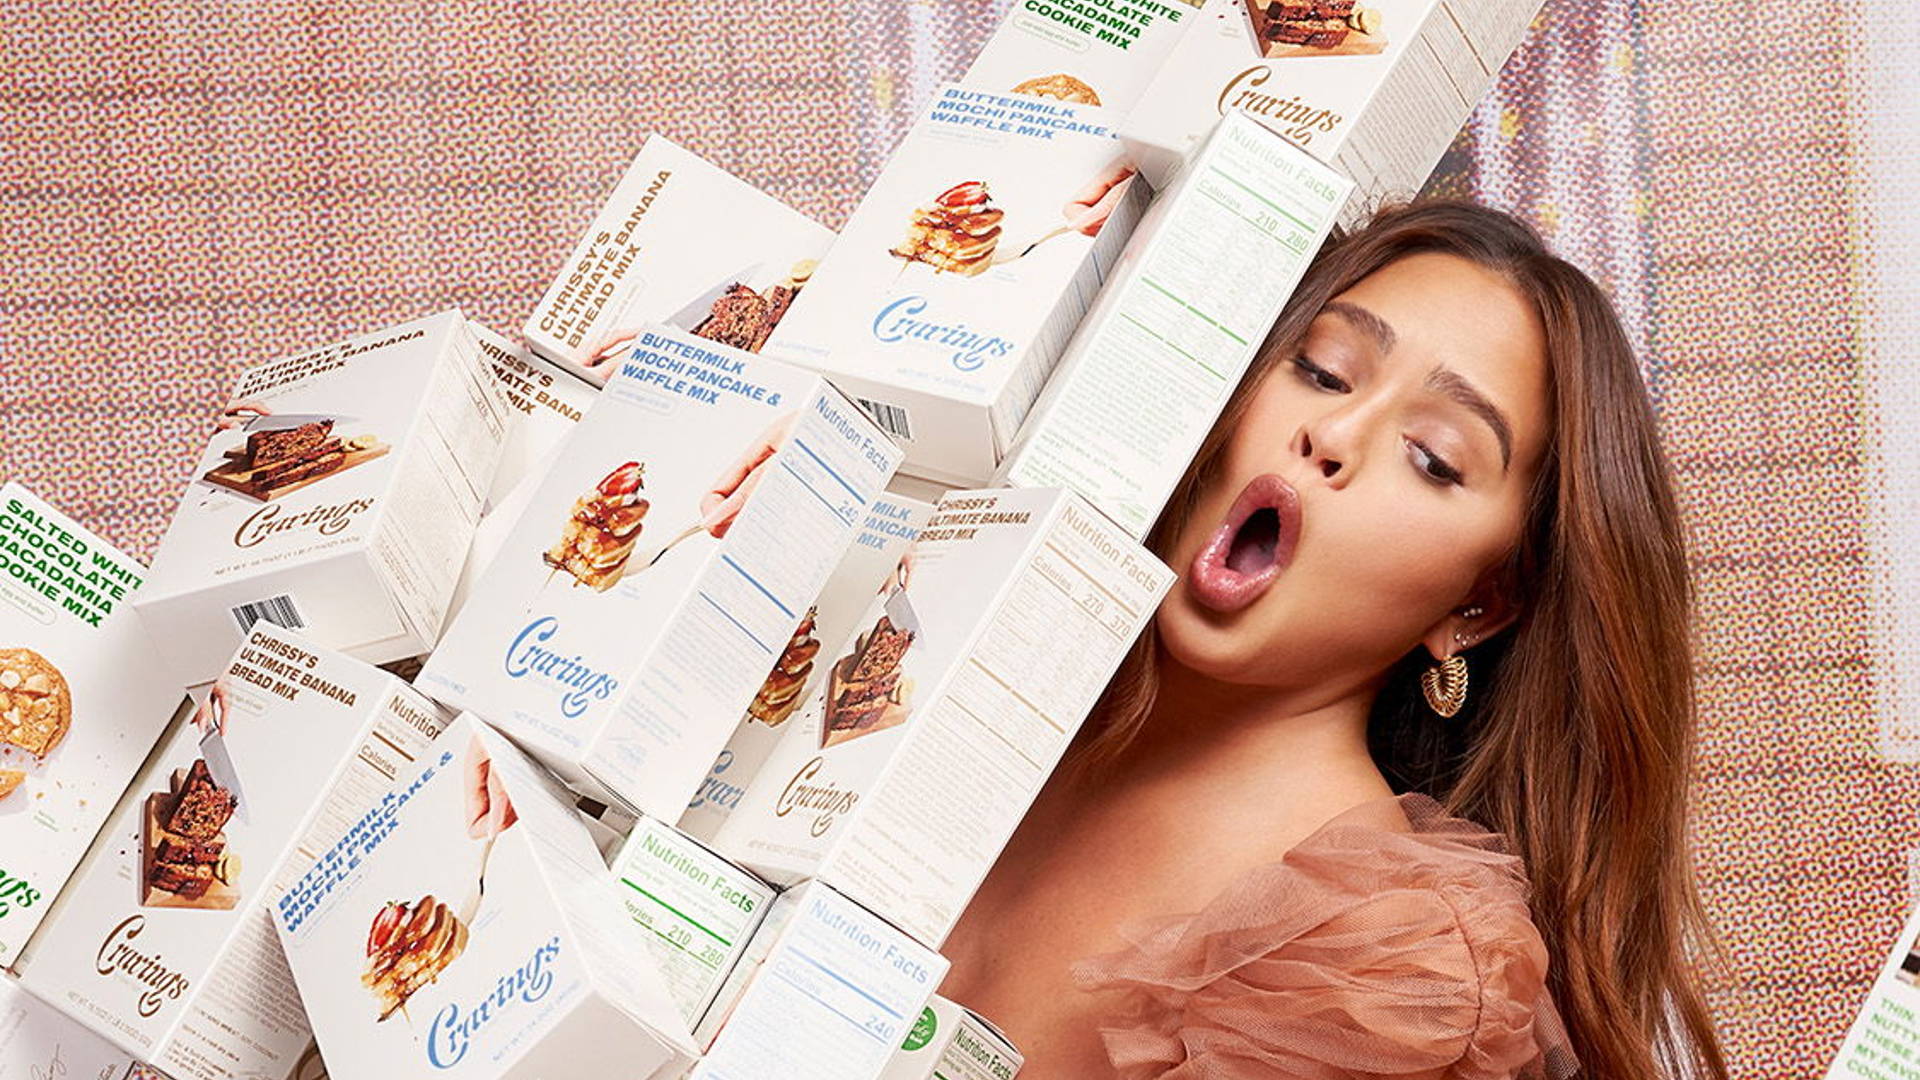 Featured image for Chrissy Teigen Finds Herself At The Root Of Another Scandal, and This One Involves Packaging